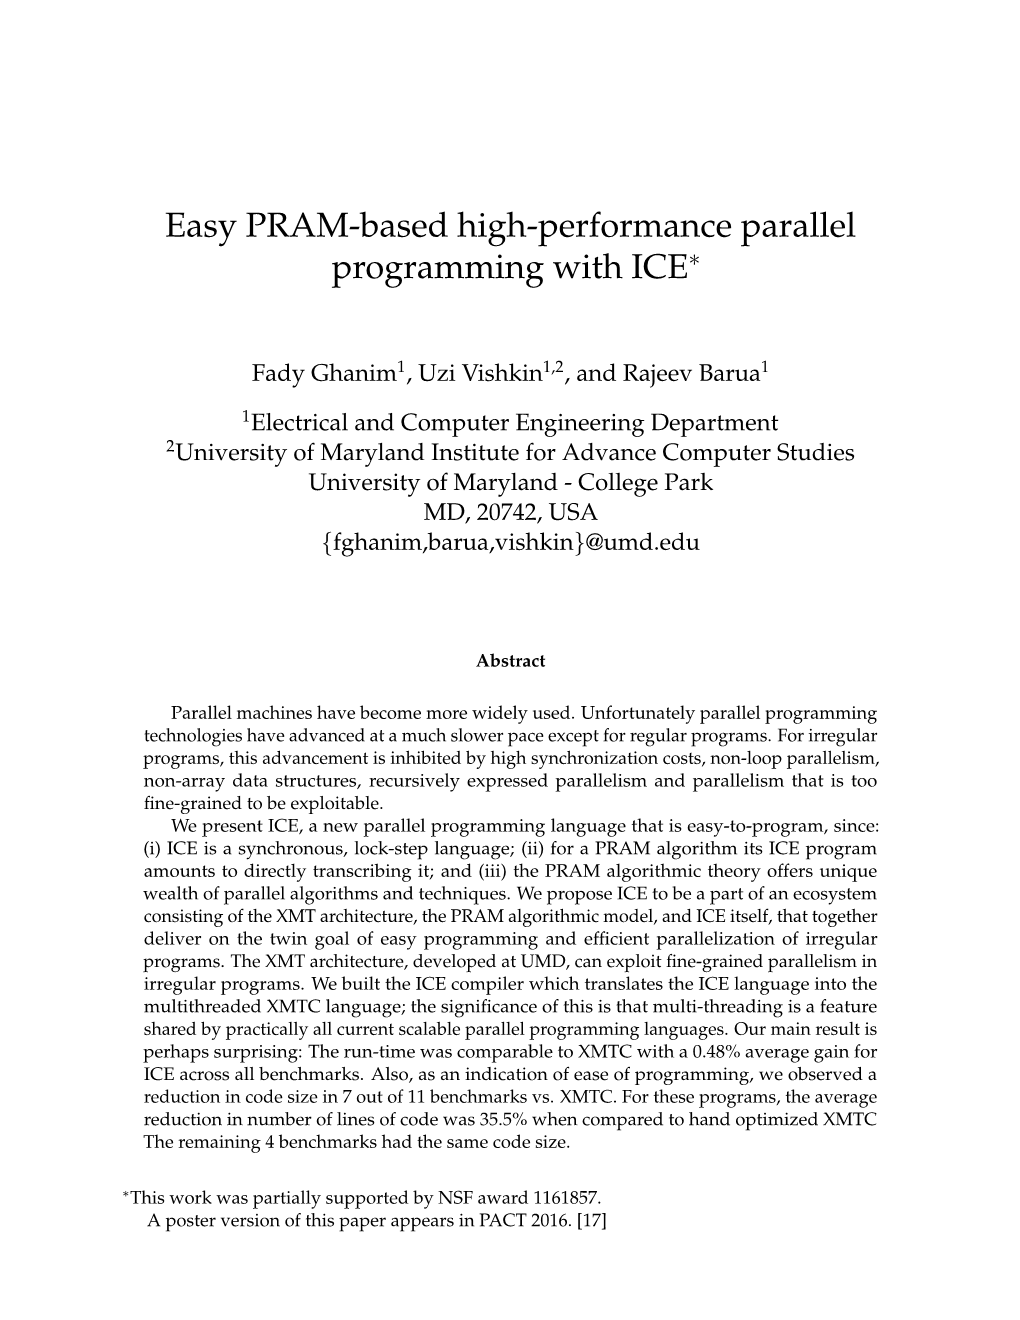 Easy PRAM-Based High-Performance Parallel Programming with ICE∗